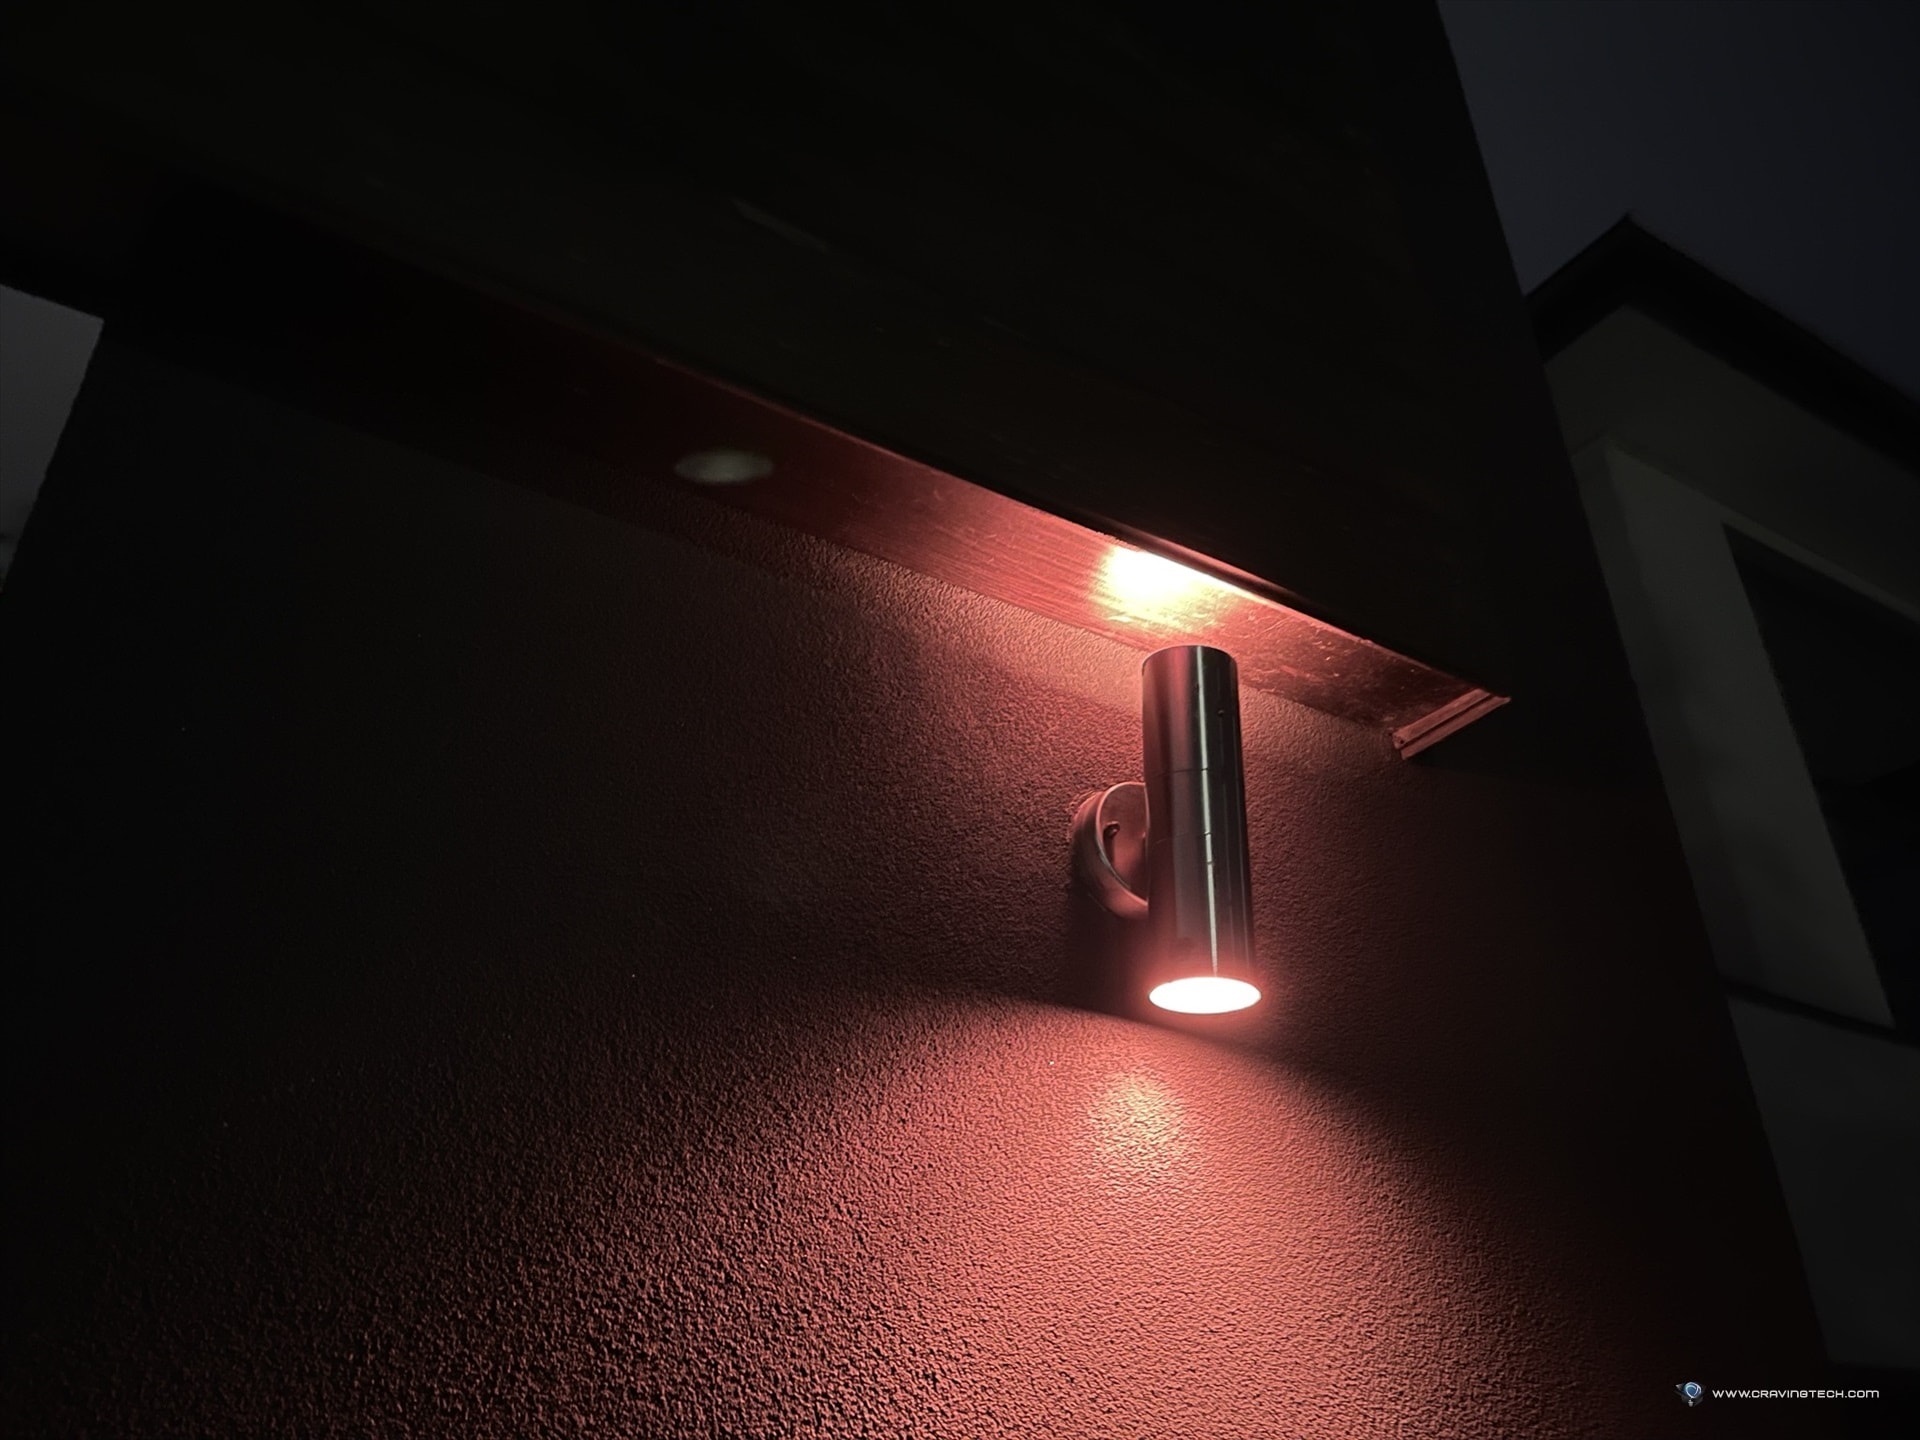 Uprade your dumb pillar lights with these energy-efficient, smart RGB downlights